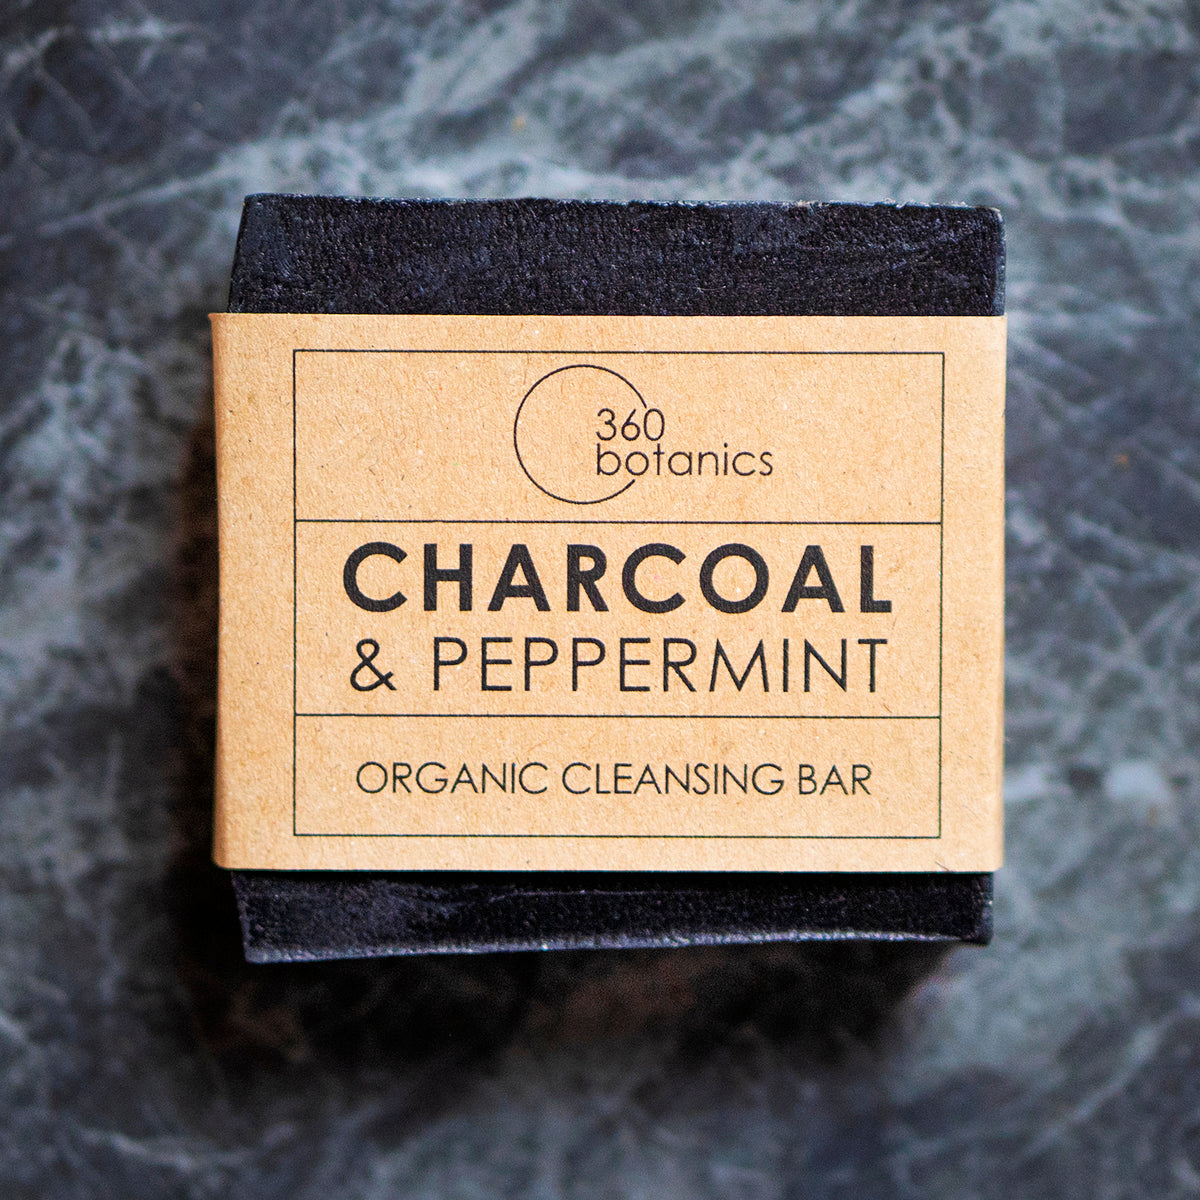  A 360 Botanics Charcoal & Peppermint organic cleansing bar with a kraft paper label, resting on a marbled grey surface.